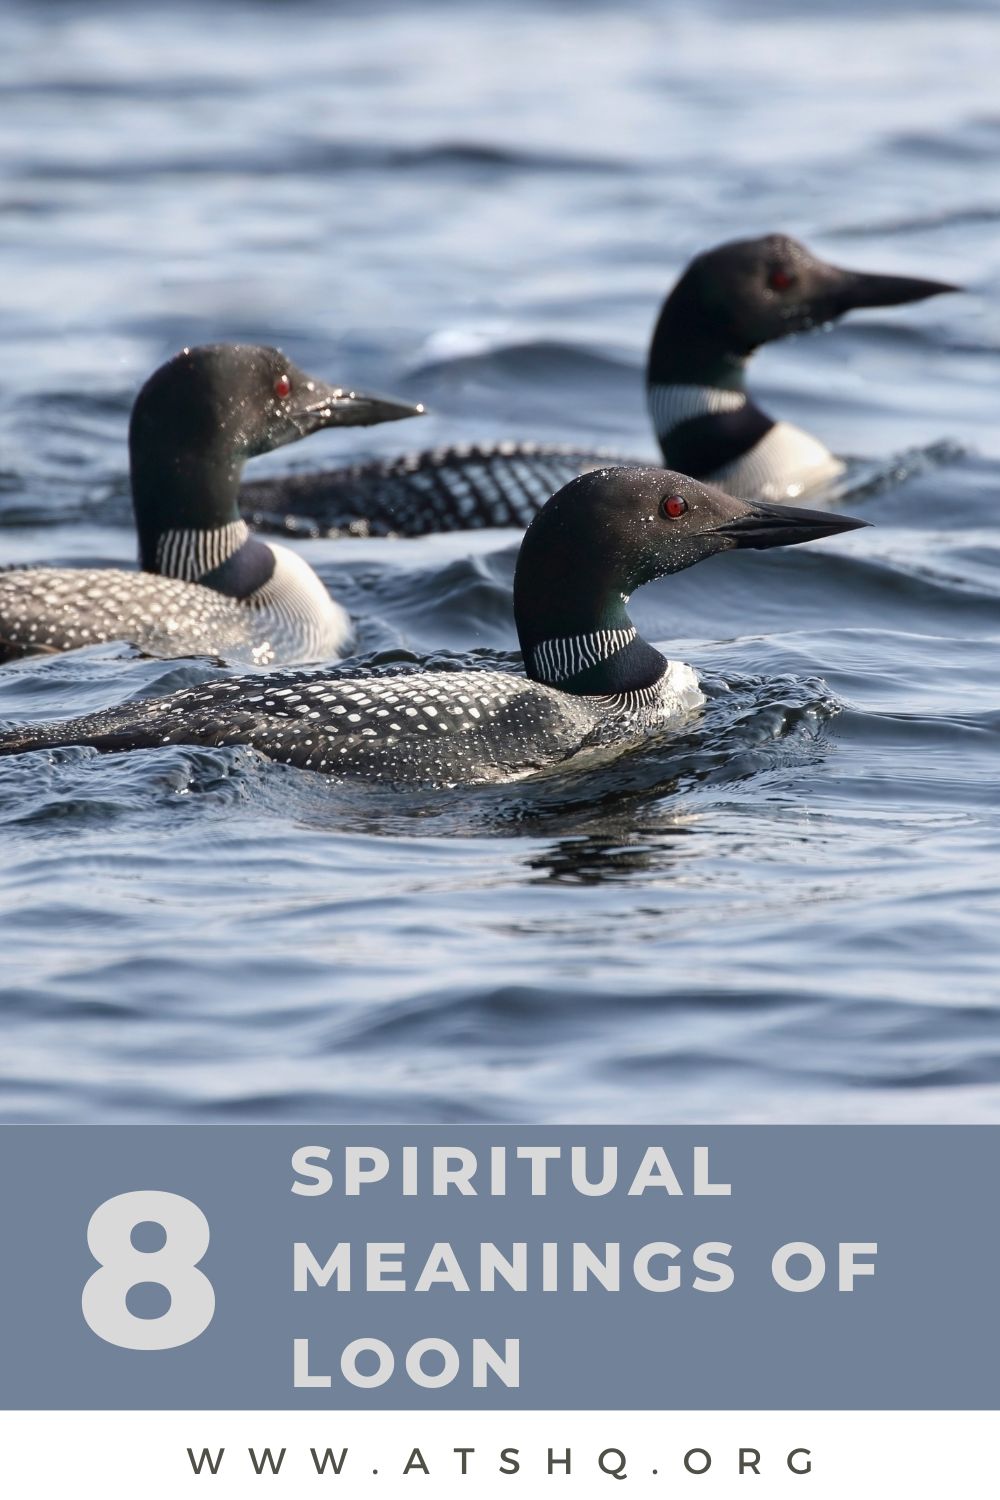 8 Spiritual Meanings of Loon